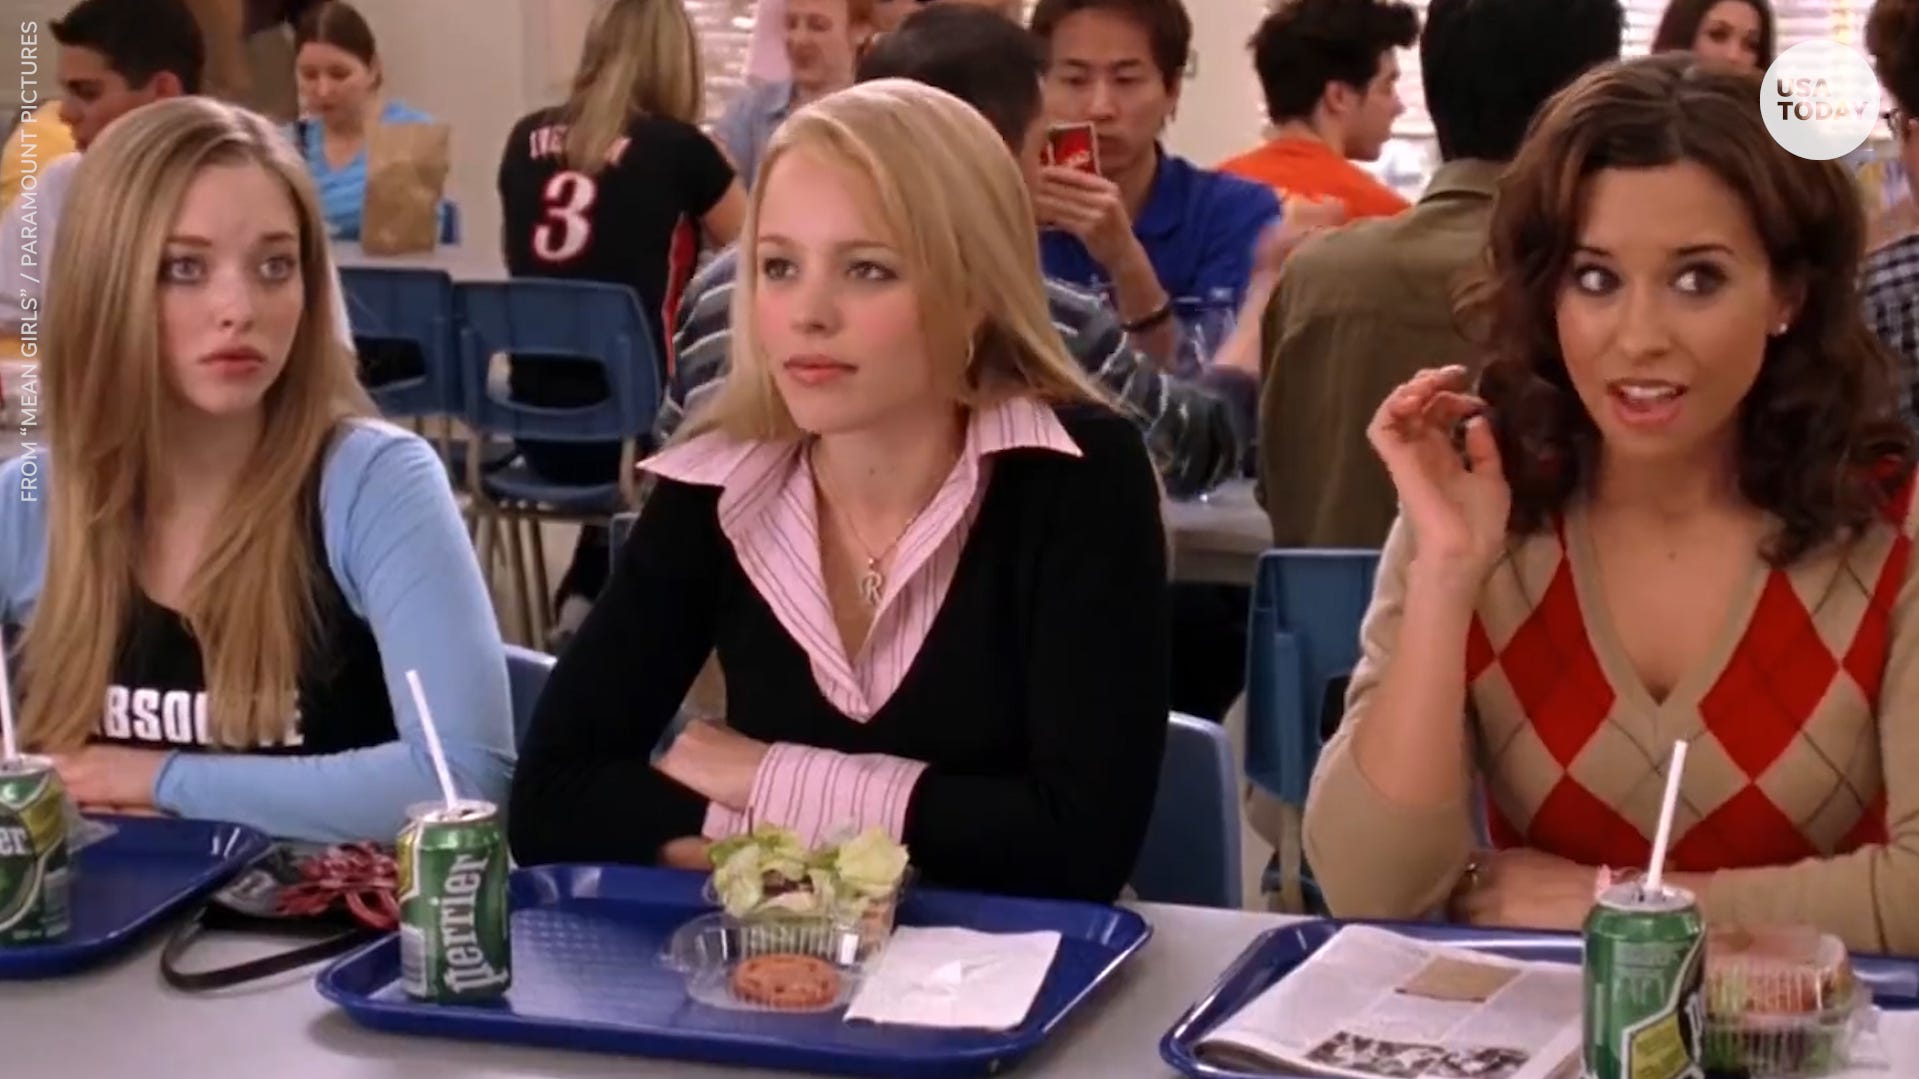 4 iconic 'Mean Girls' moments that we won't forget